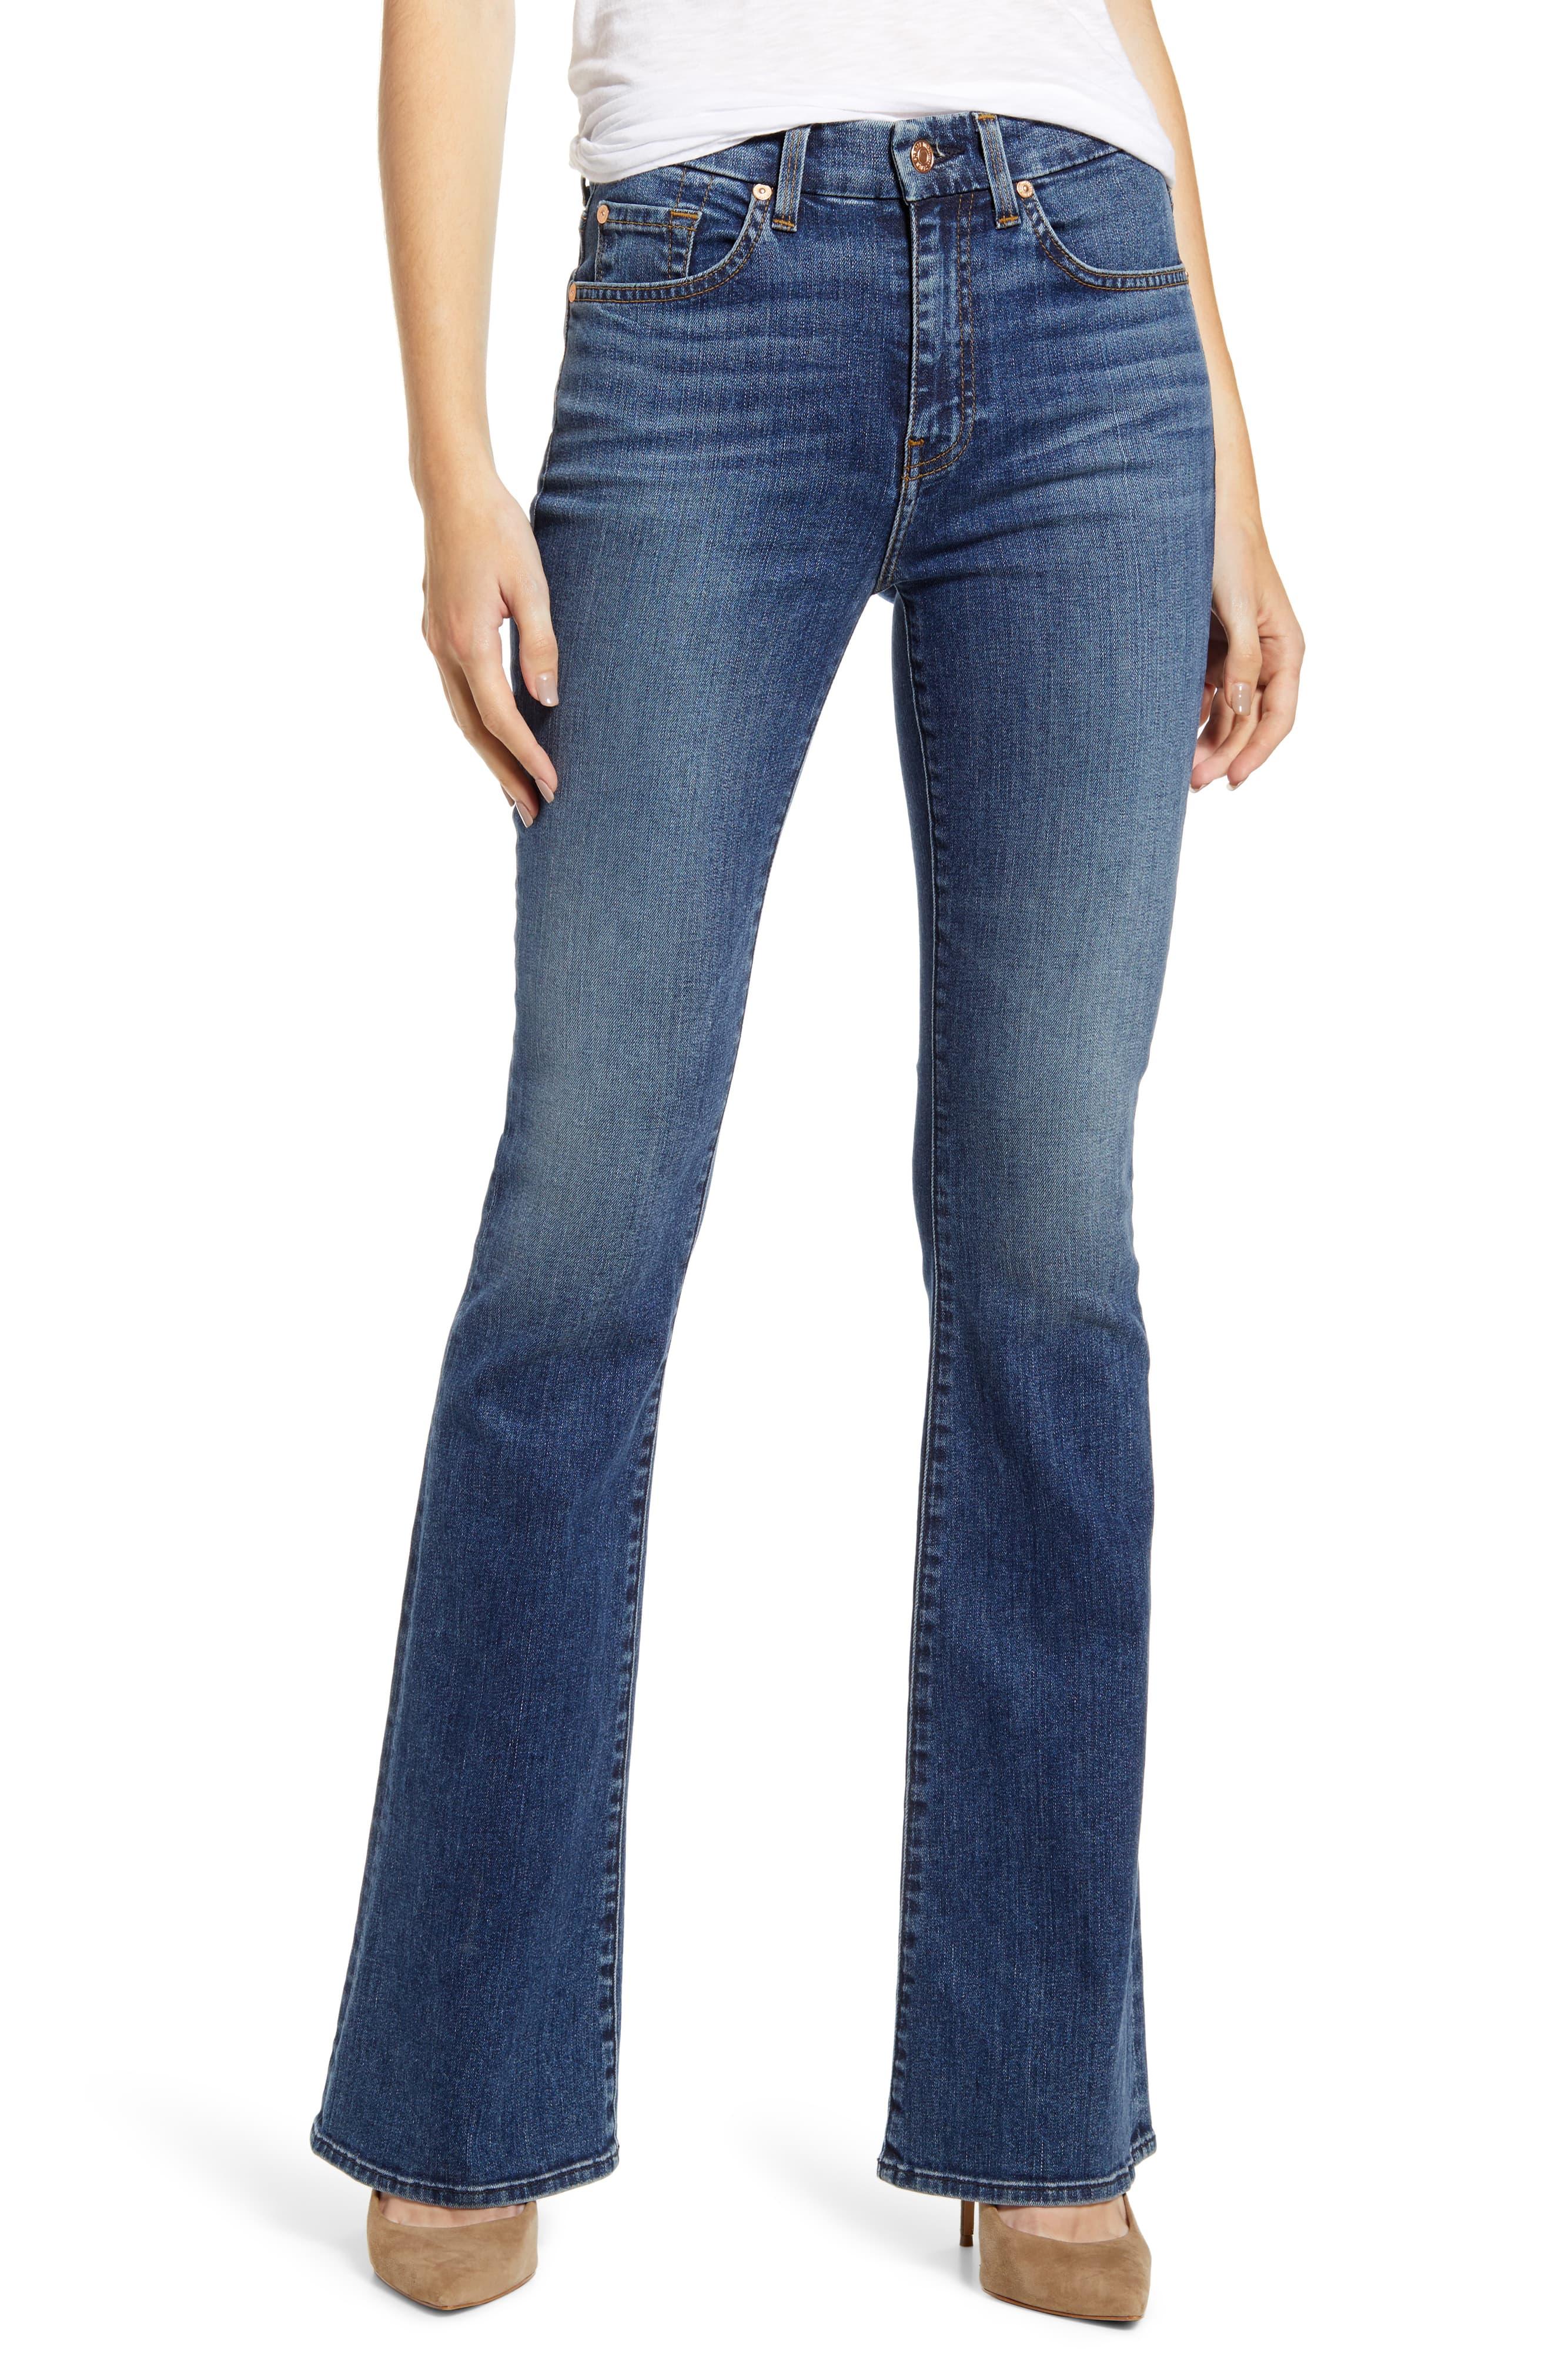 7 For All Mankind 7 For All Mankind Ali High Waist Flare Leg Jeans in Blue - Lyst